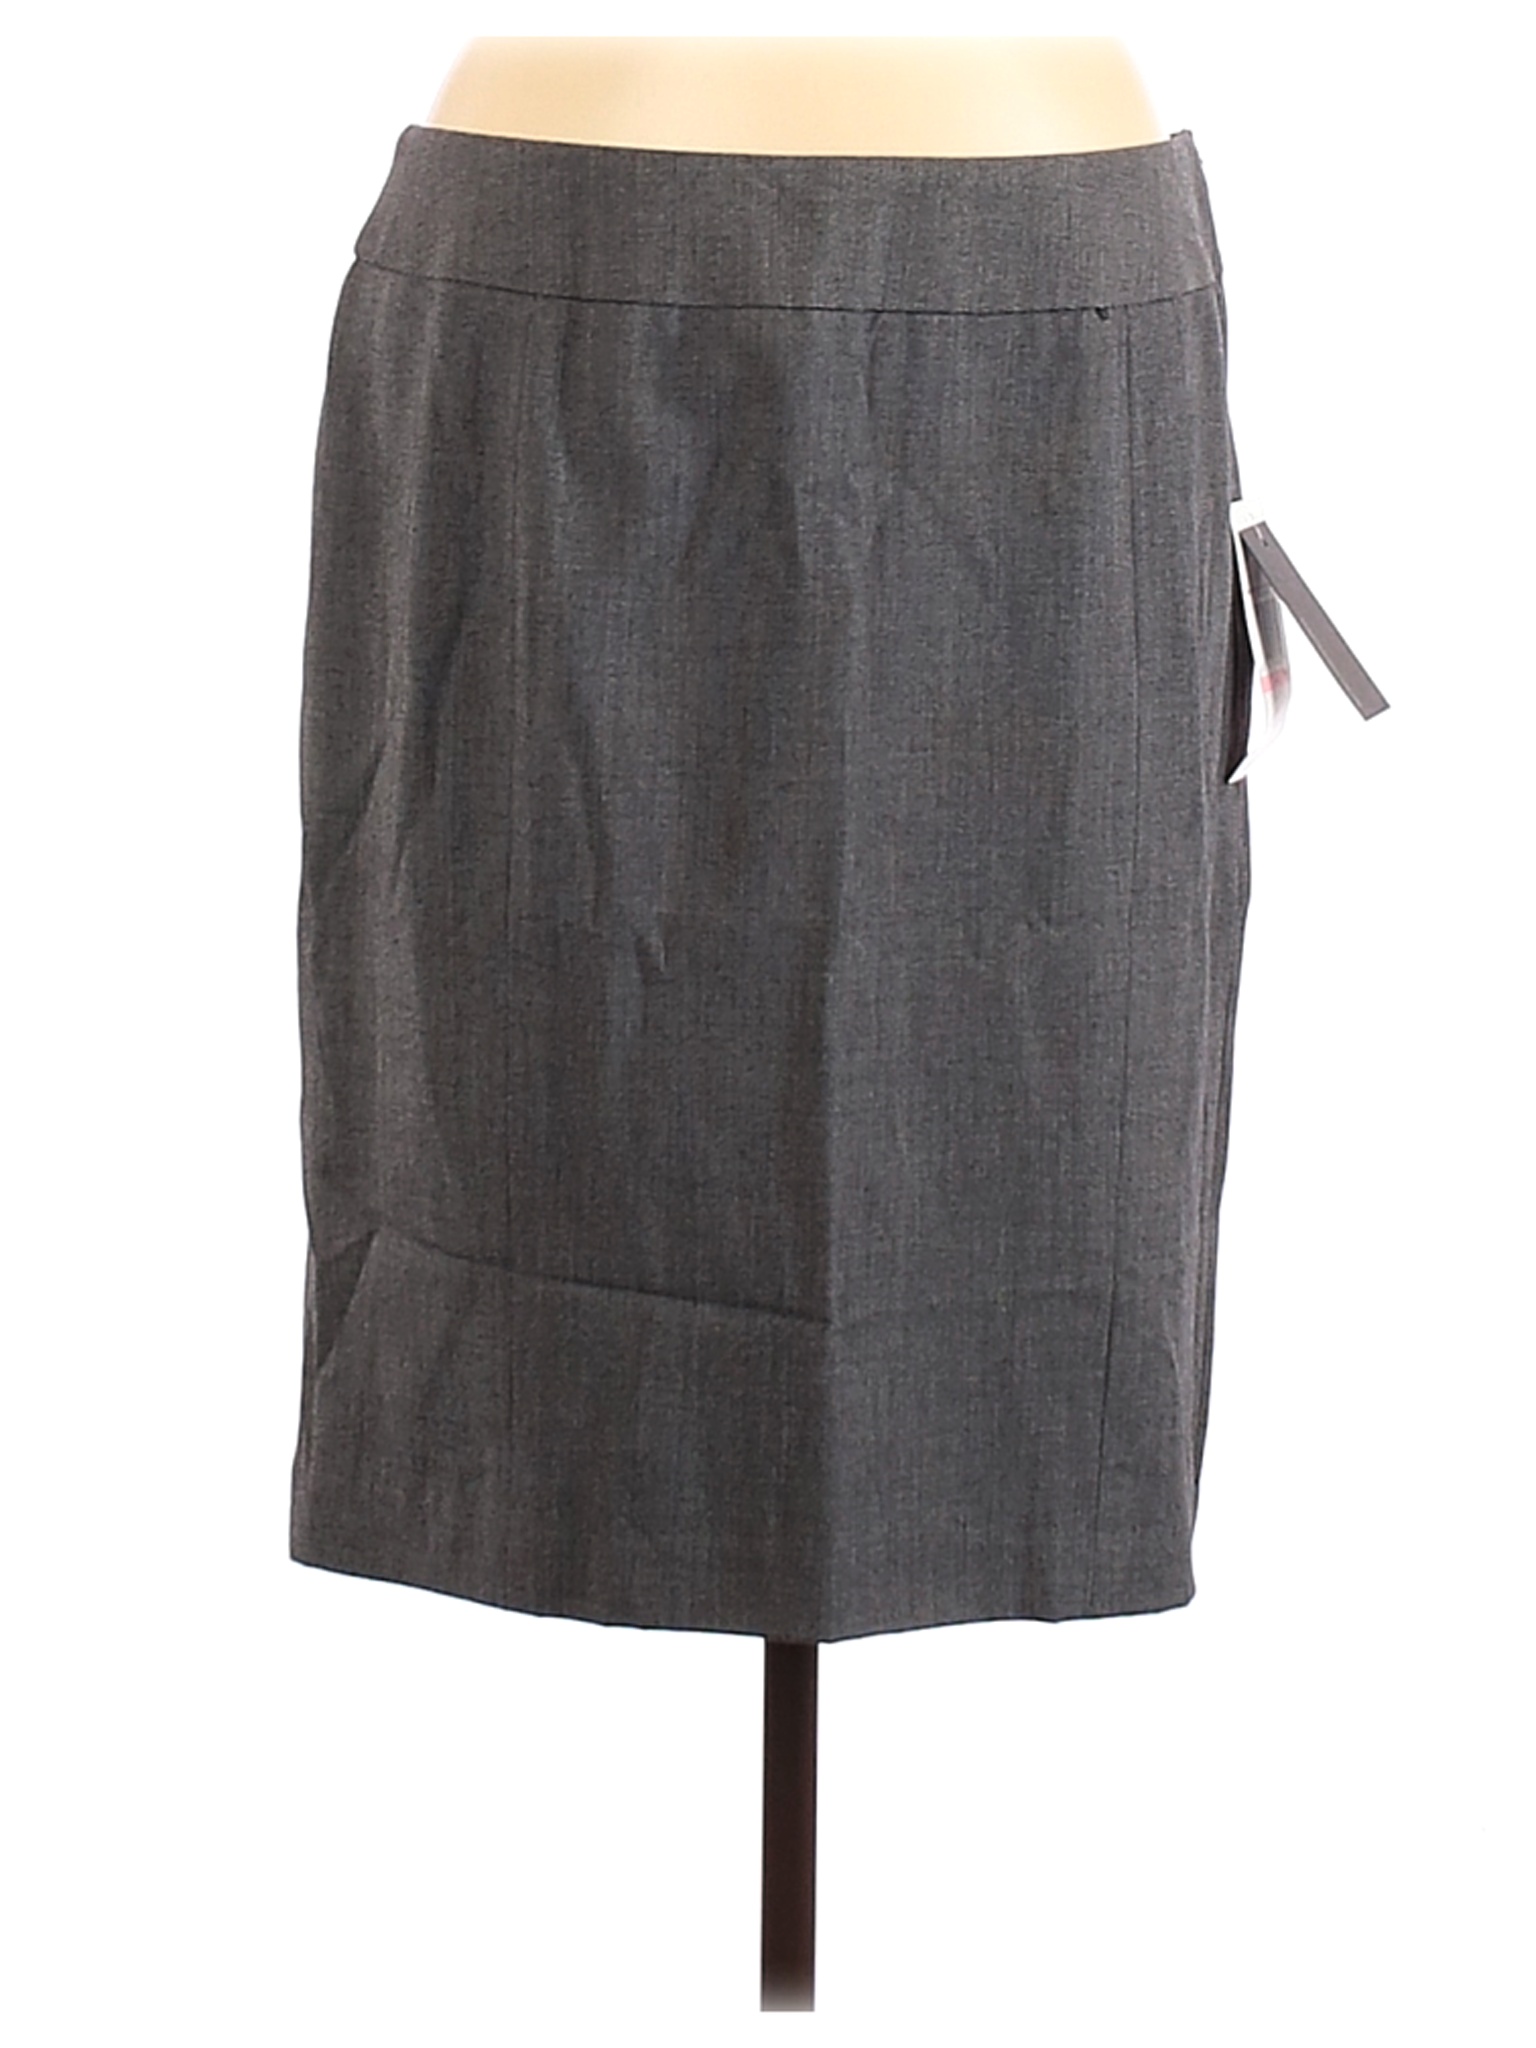 NWT Kenneth Cole REACTION Women Gray Casual Skirt 10 | eBay